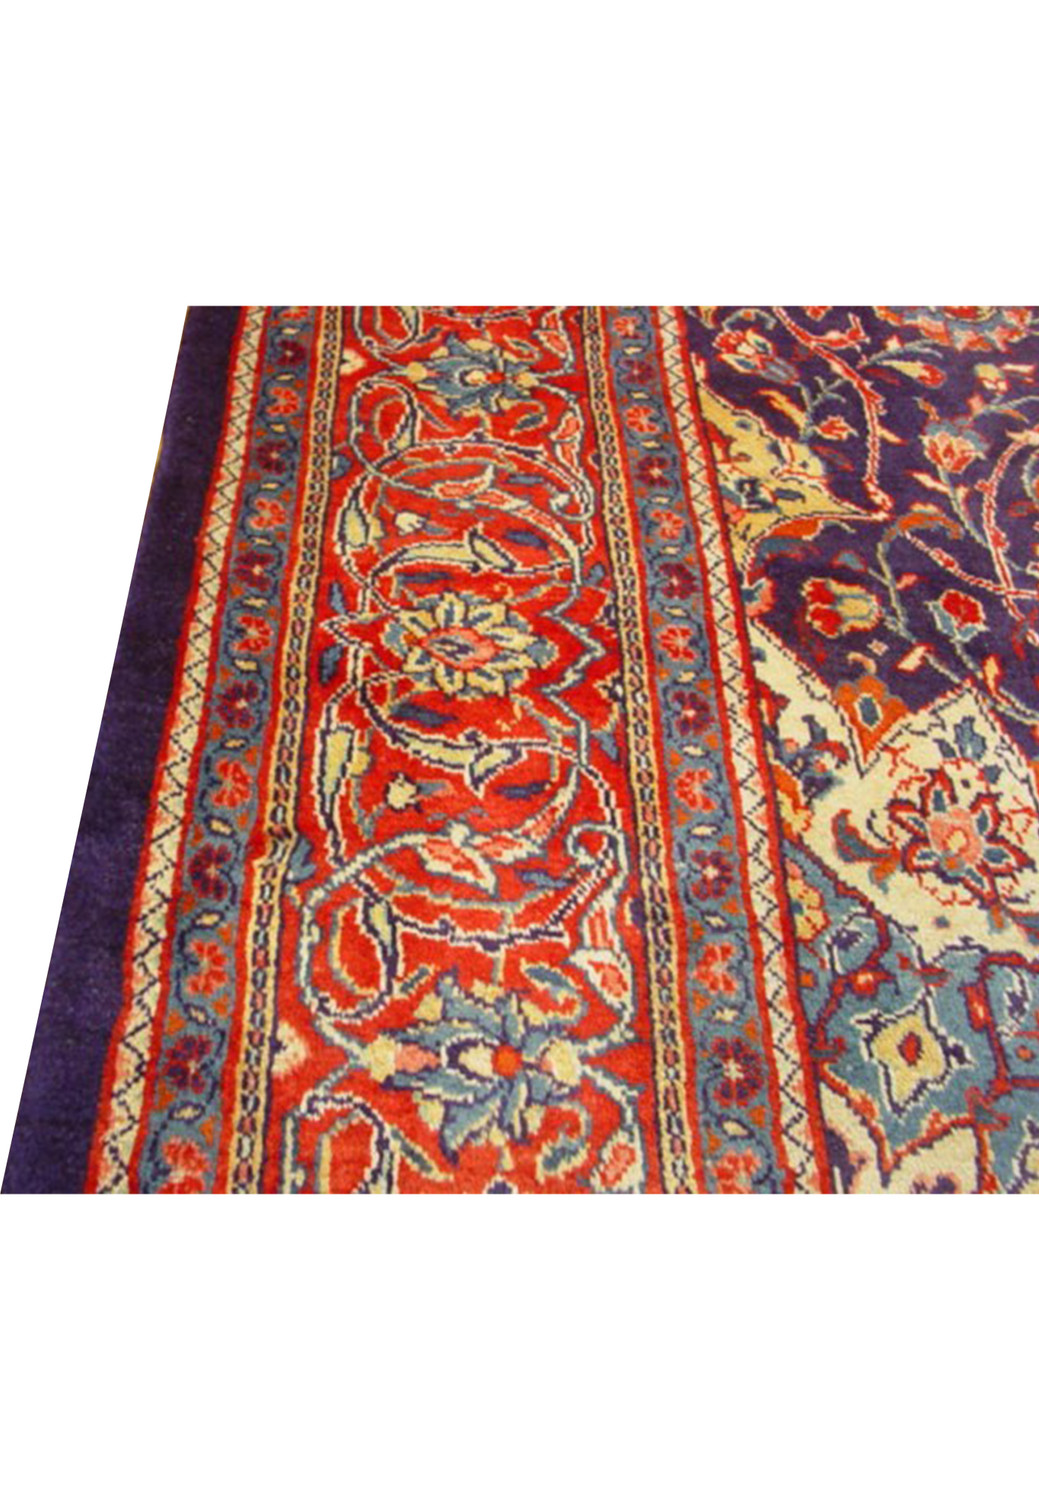 Side border detail of a Persian Mahal Rug, highlighting the fine weave and intricate patterns in contrasting colors.